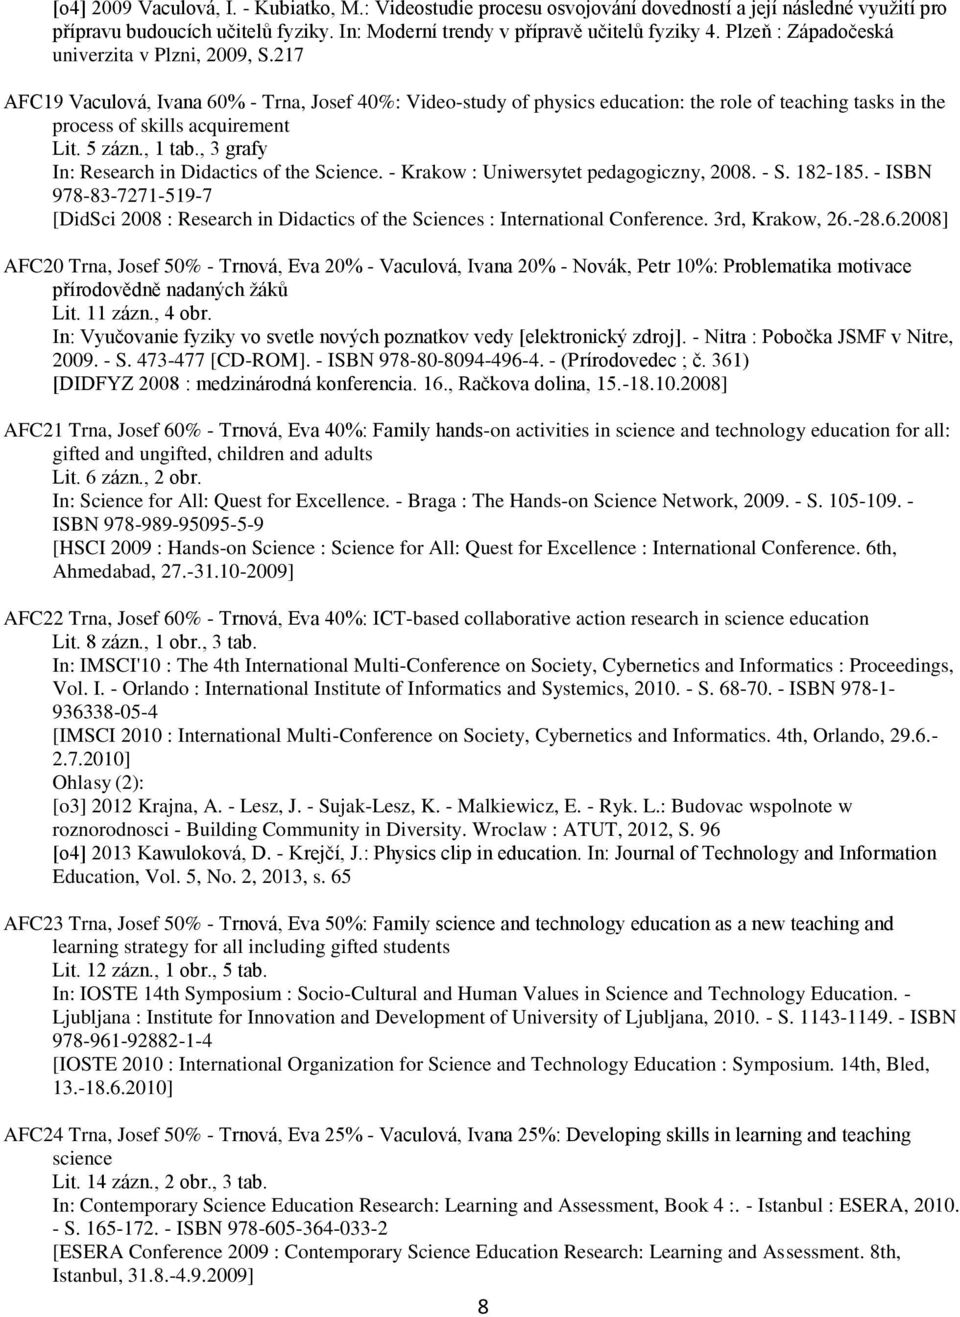 5 zázn., 1 tab., 3 grafy In: Research in Didactics of the Science. - Krakow : Uniwersytet pedagogiczny, 2008. - S. 182-185.